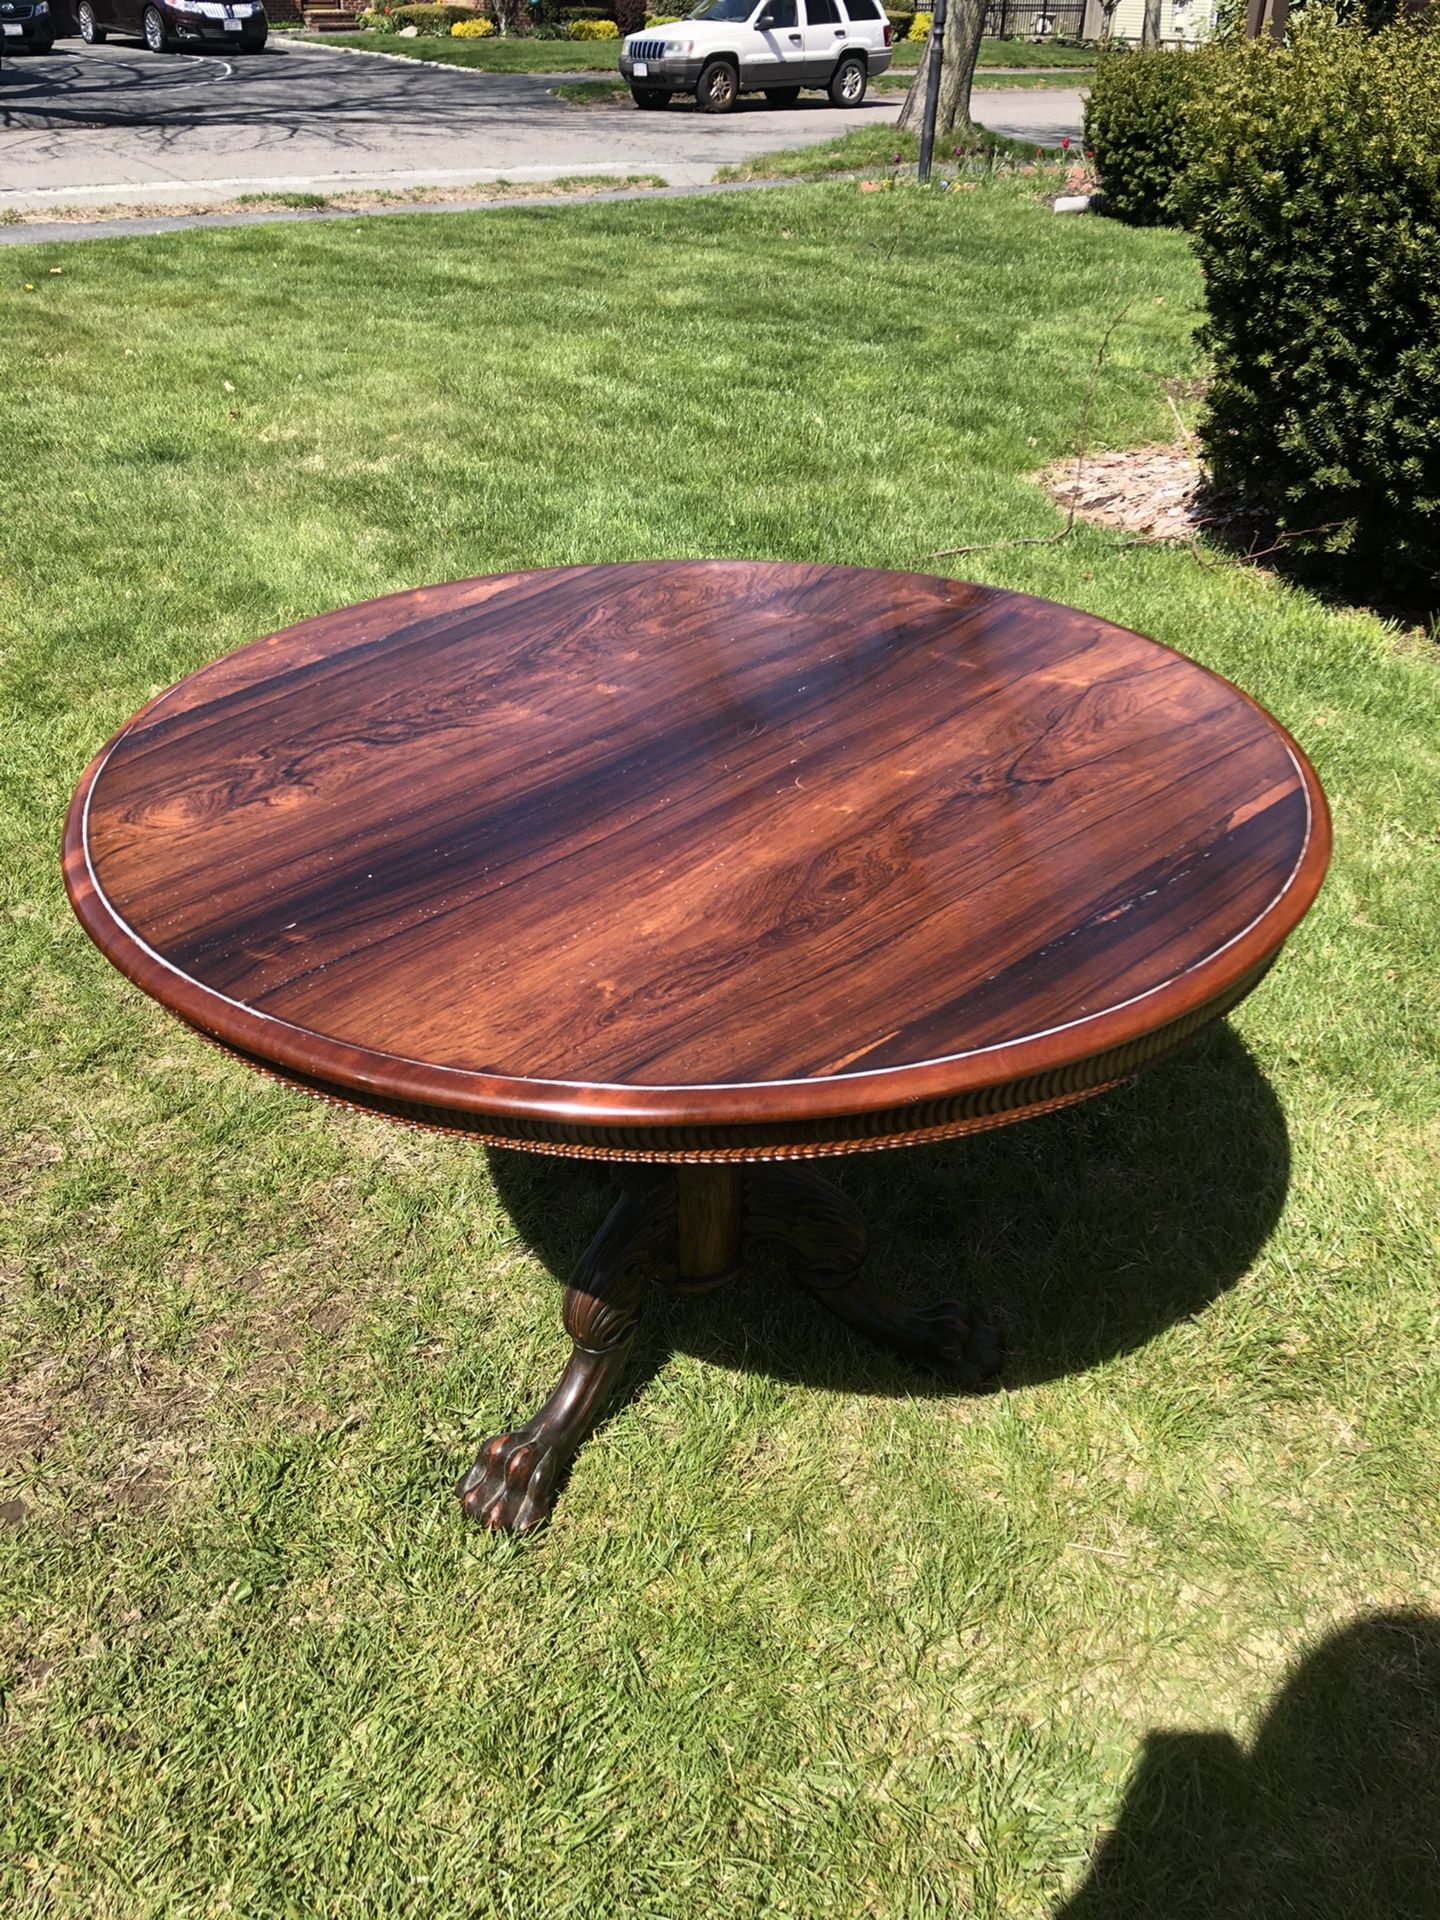 Antique rosewood table